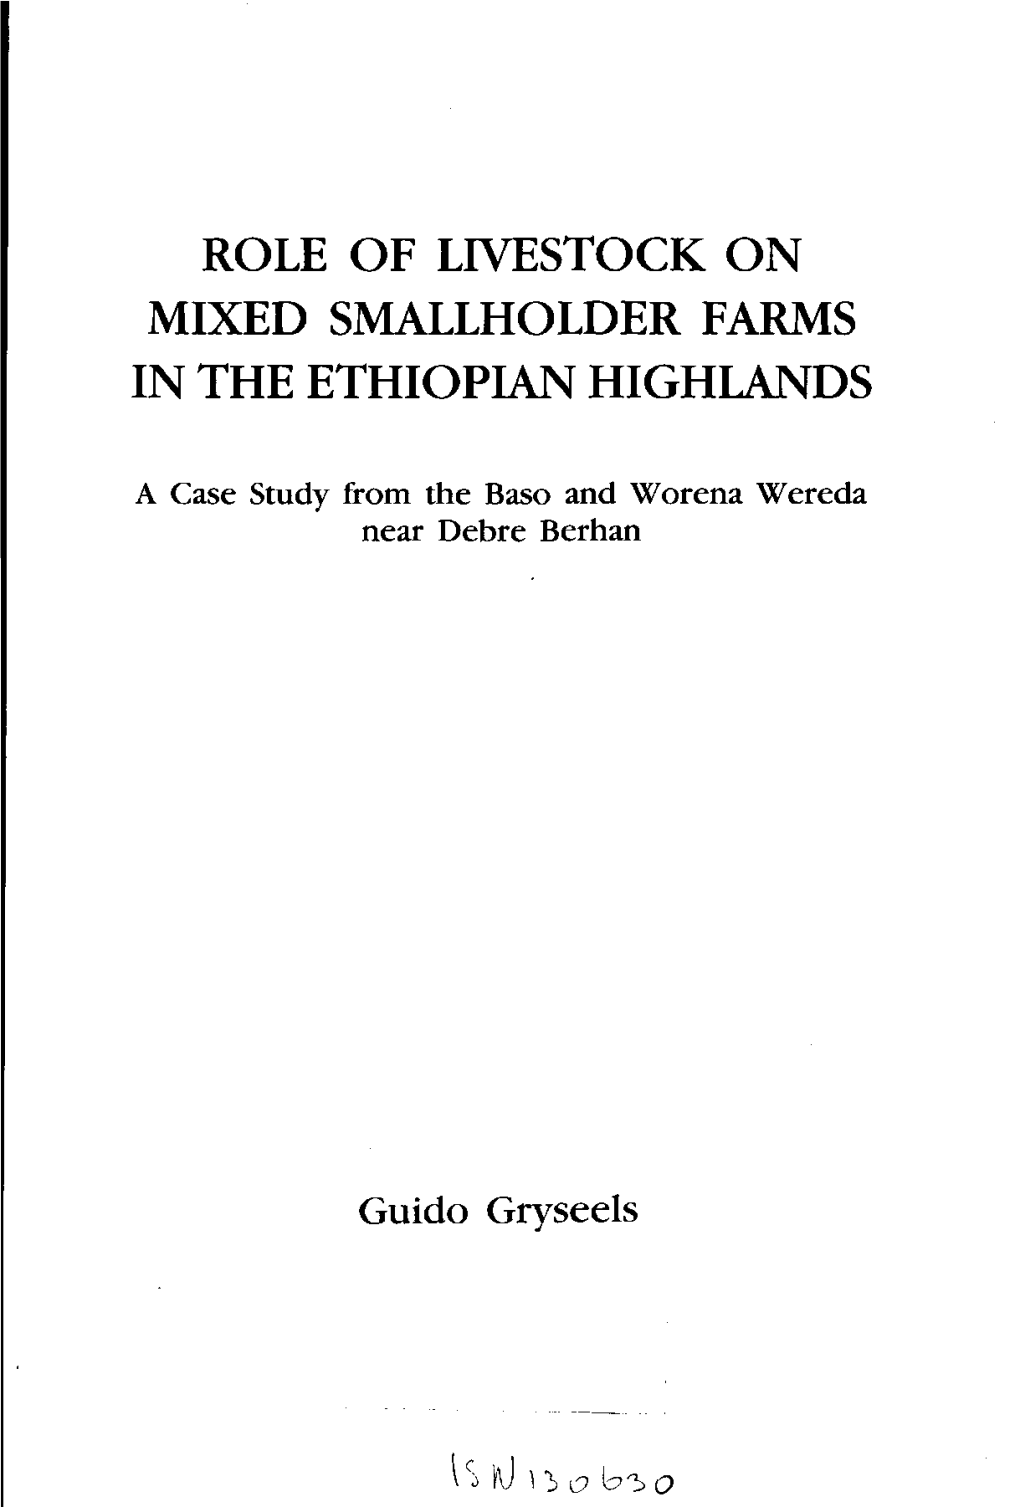 Role of Livestock on Mixed Smallholder Farms in the Ethiopian Highlands